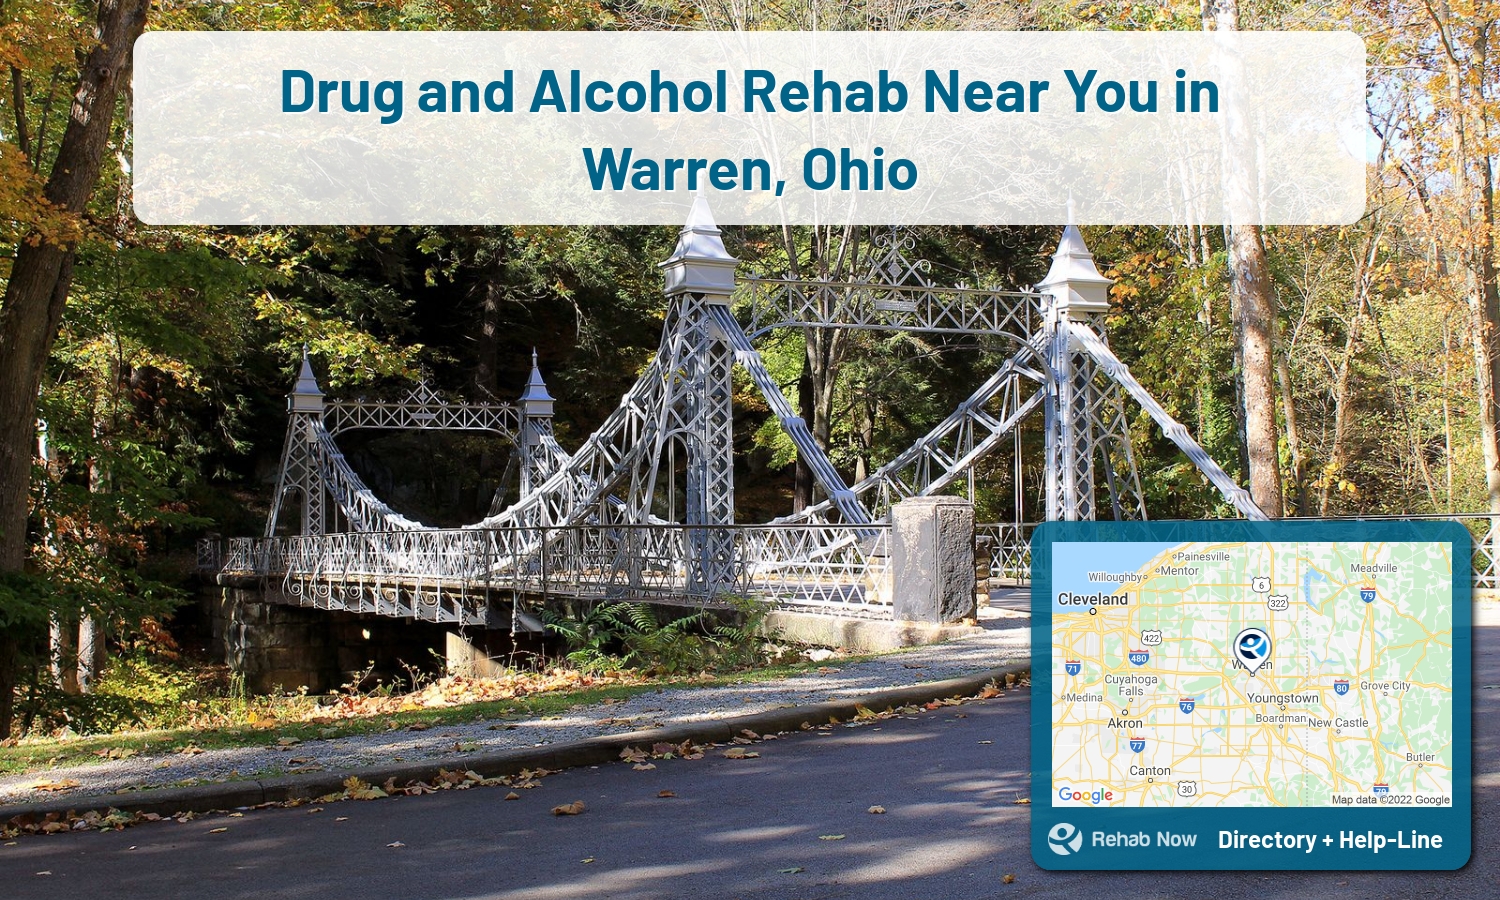 Our experts can help you find treatment now in Warren, Ohio. We list drug rehab and alcohol centers in Ohio.